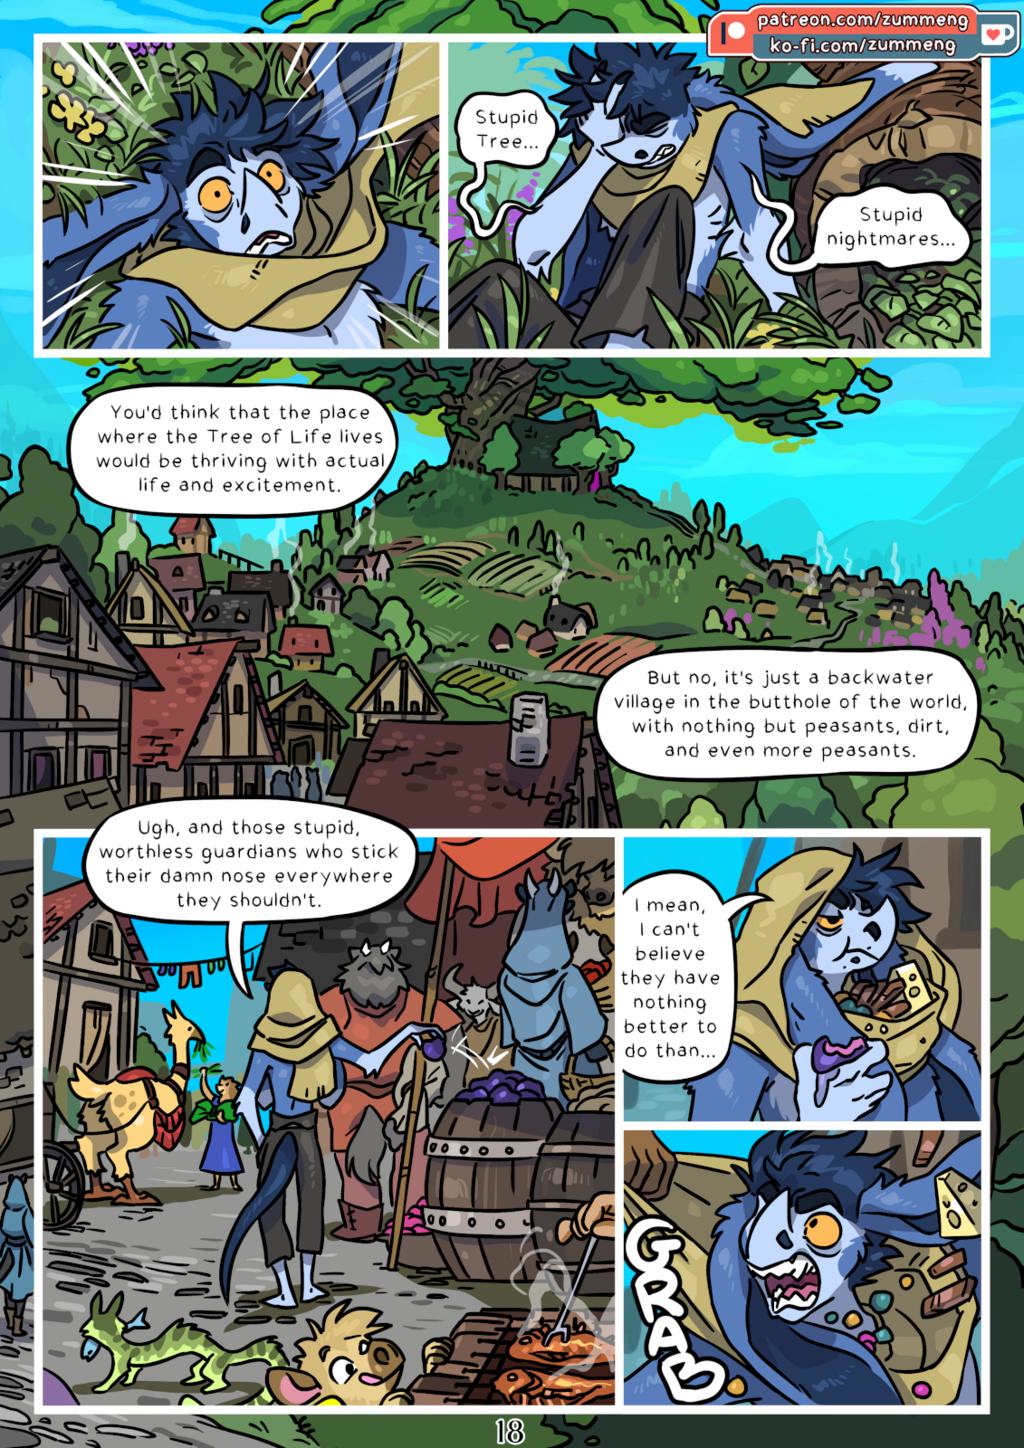 Tree of Life - Book 1 pg. 18.